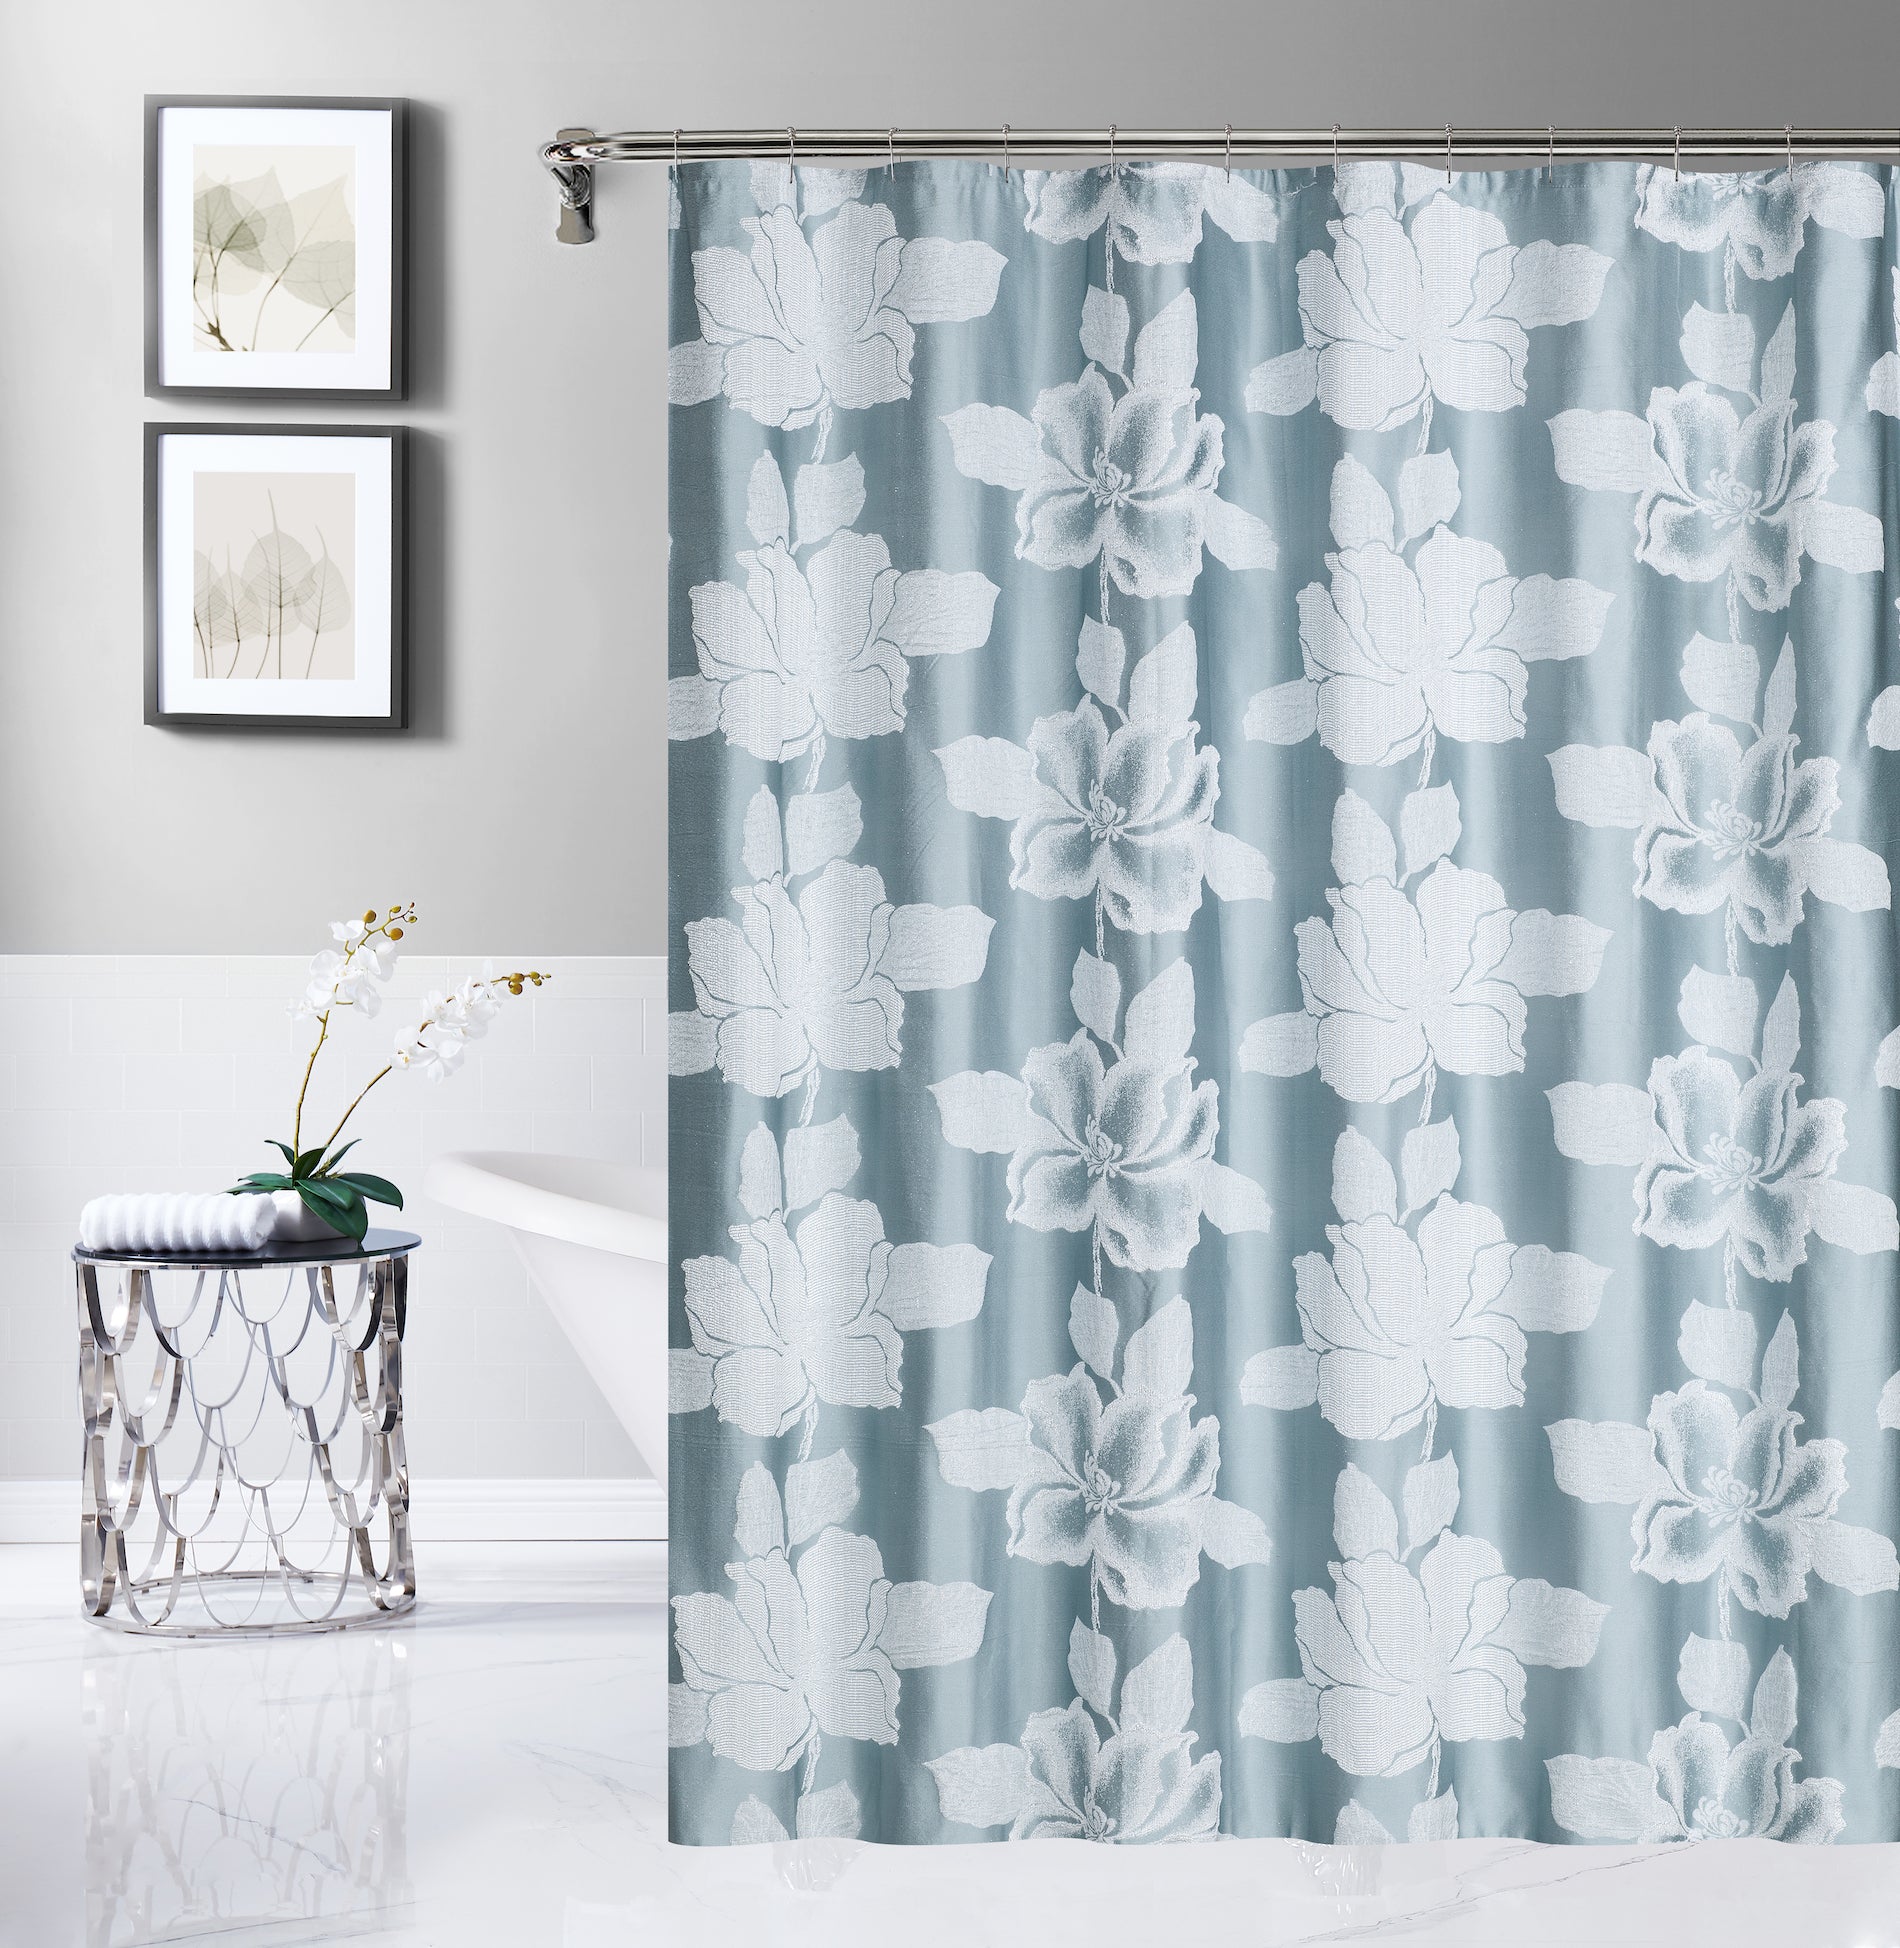 Dainty Home Floral Park 3D Floral Textured Weaved Lurex Floral Designed Fabric Shower Curtain 70"x 72"